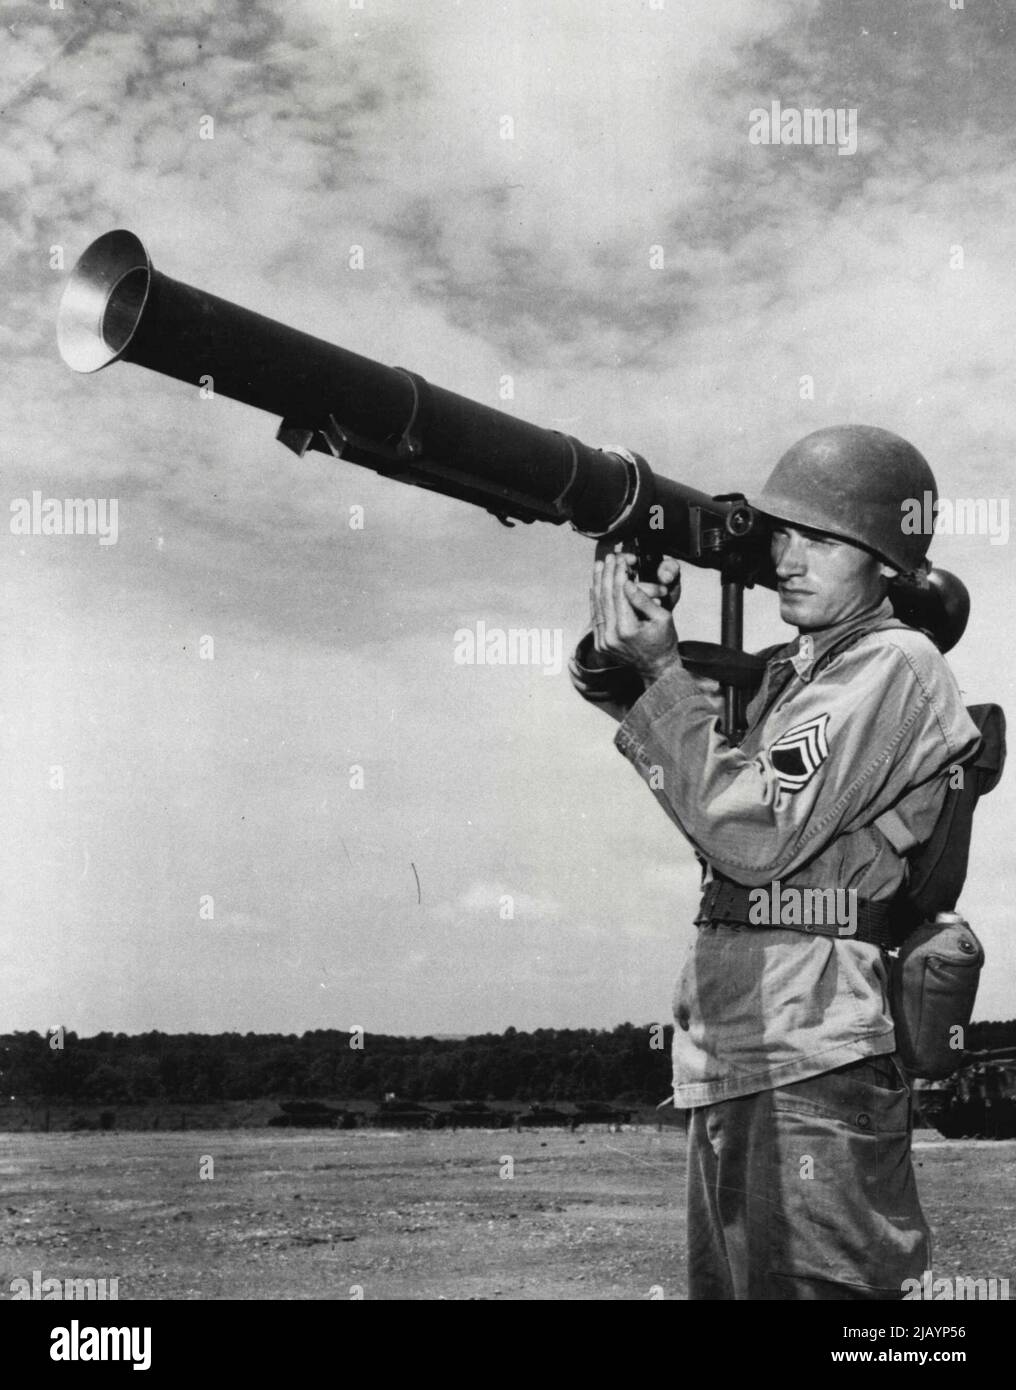 Sad Music For Tanks -- An infantry sergeant demonstrates the 3.5 Bazooka. Reports from the Korean battlefront have indicated that the smaller Bazookas were not effective enough when pitted against the Russian-Built heavy tanks. July 18, 1950. (Photo by U.S. Army Photo). Stock Photo